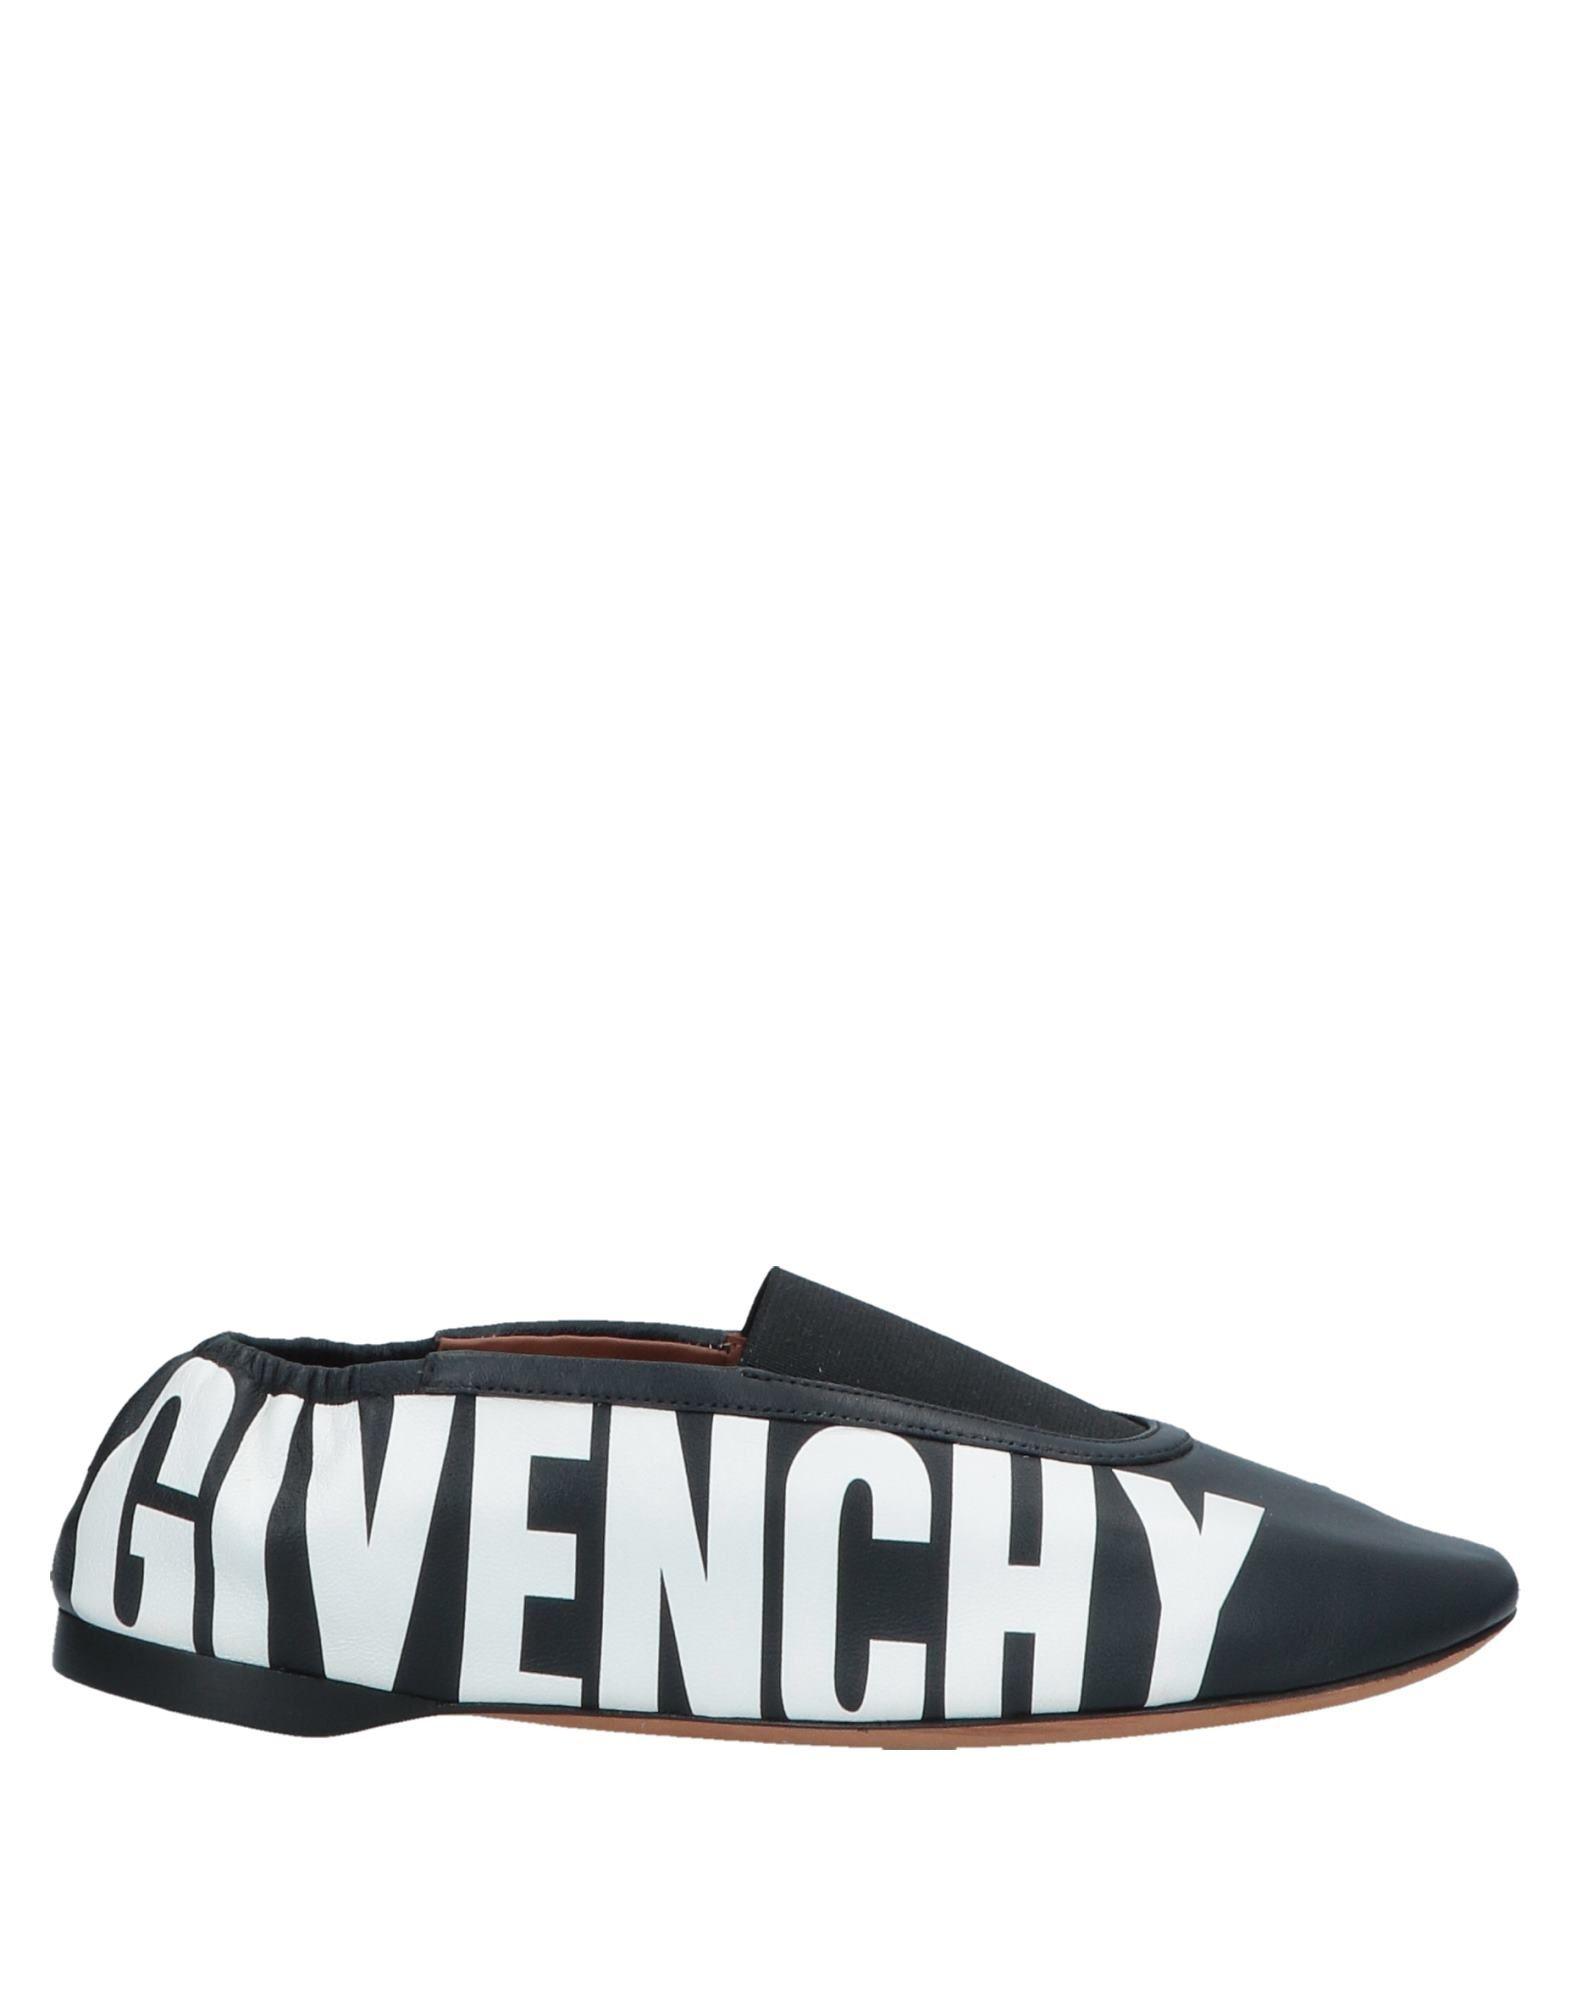 givenchy shoes flats